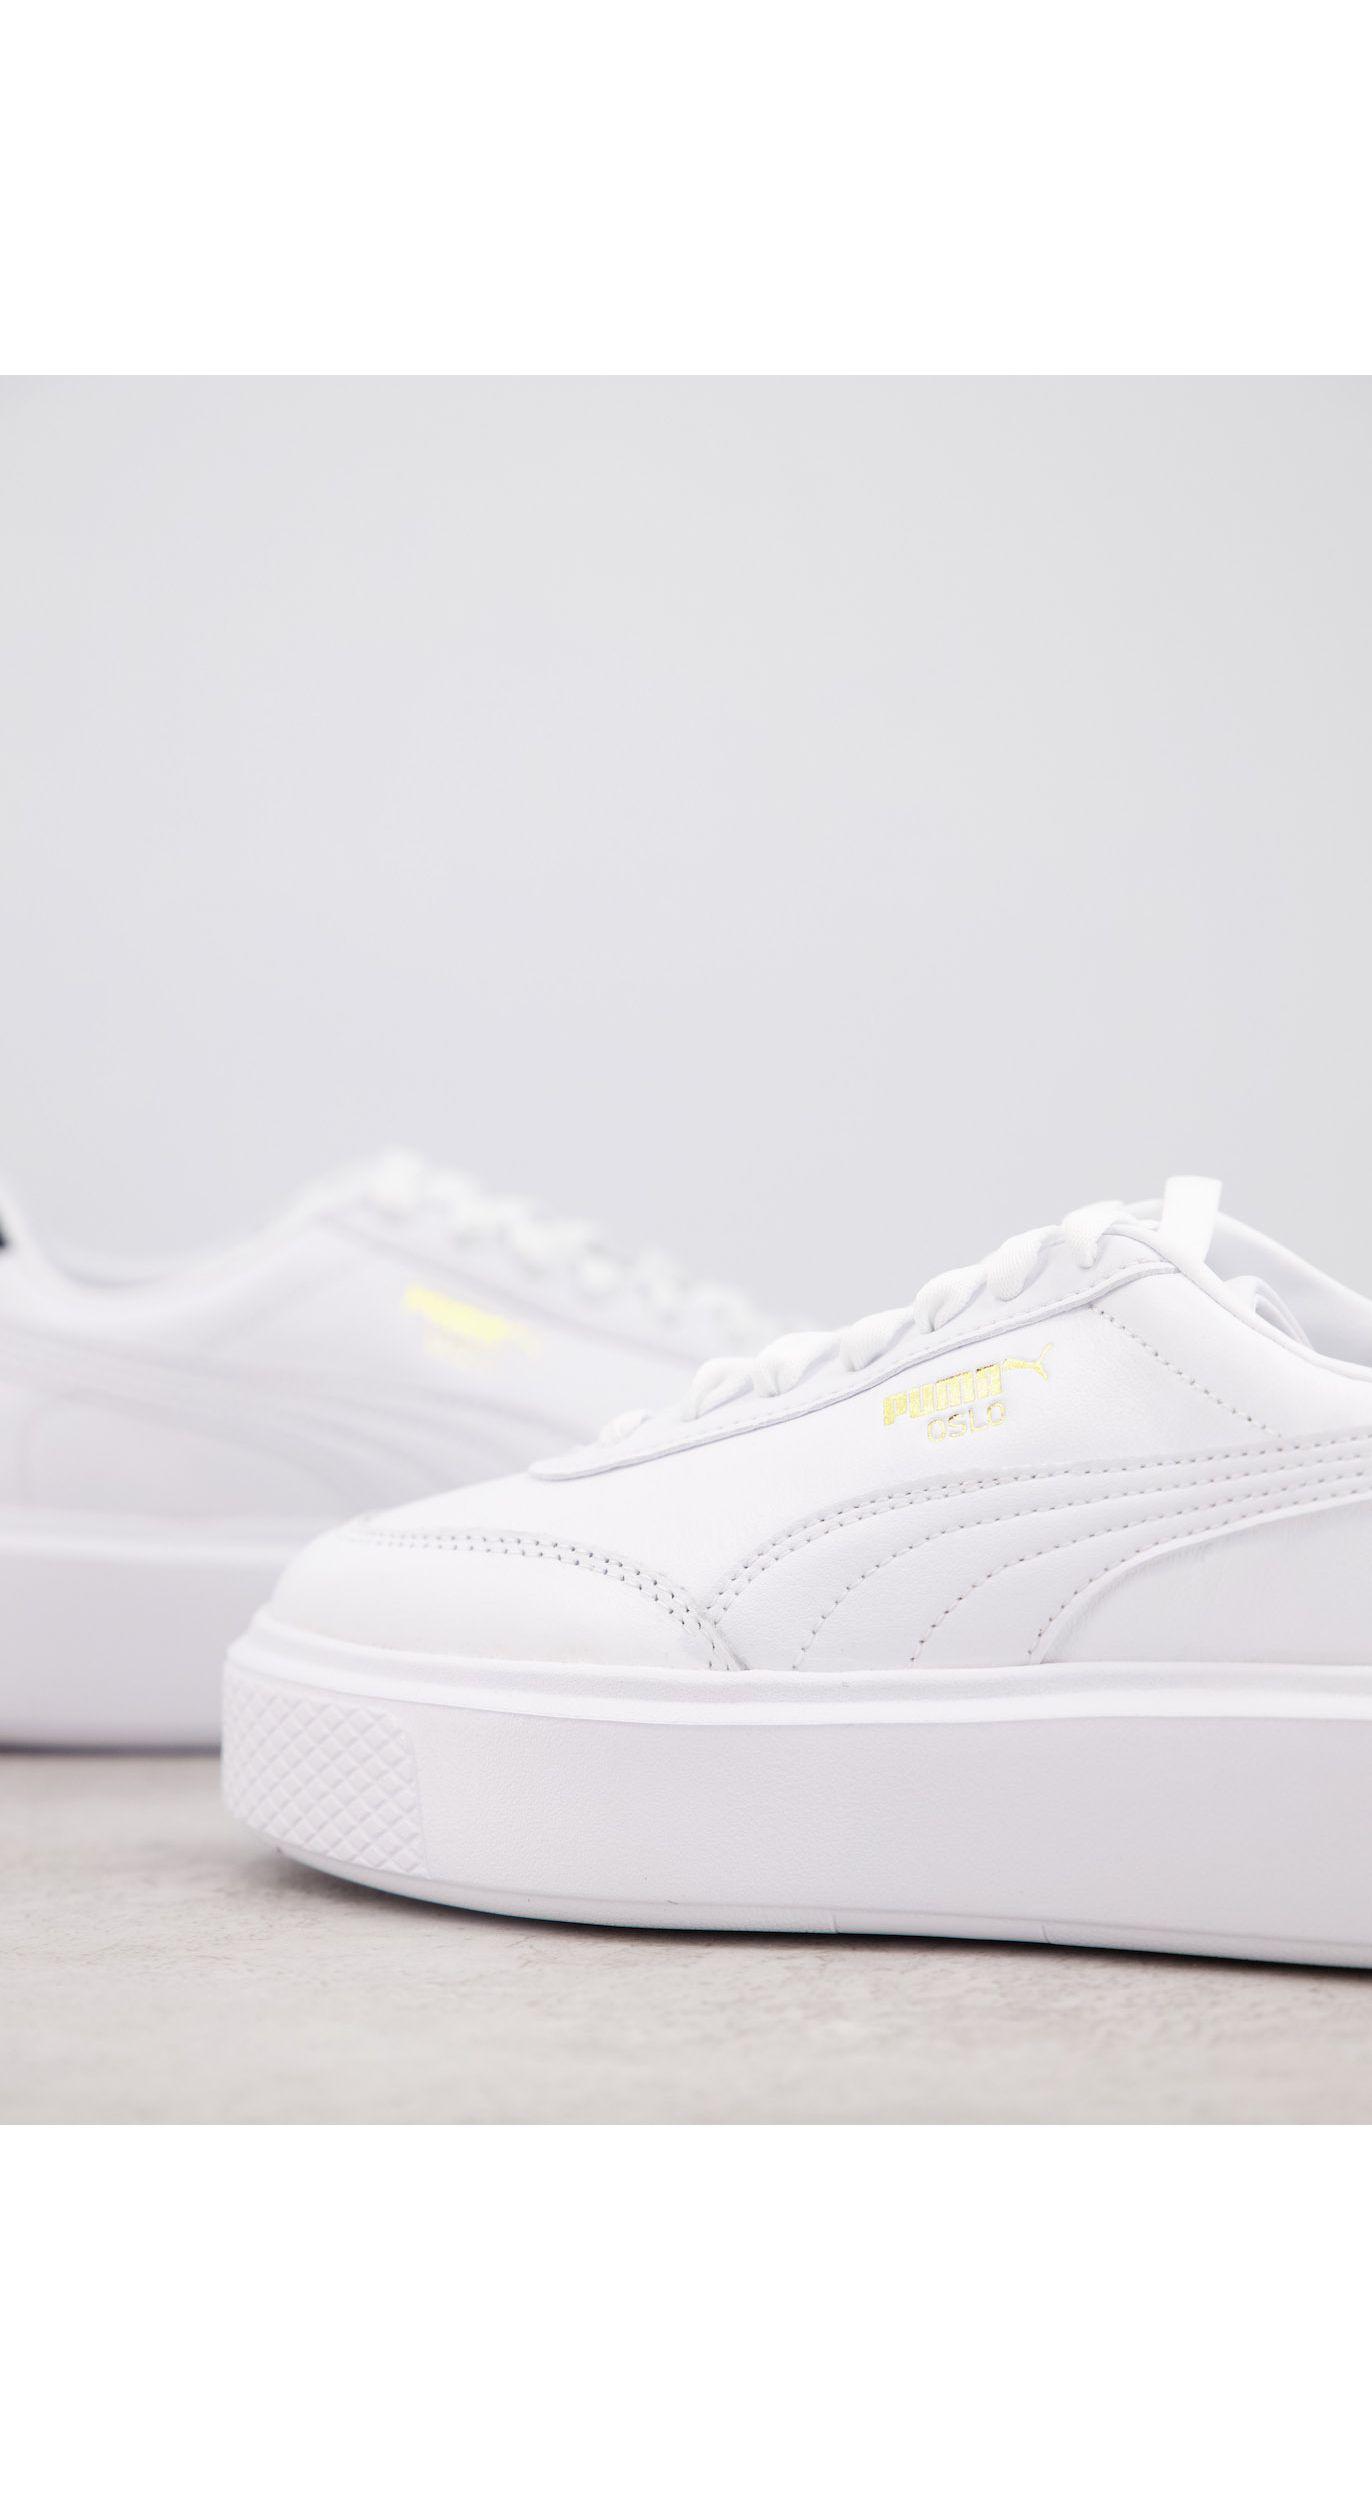 PUMA Rubber Oslo Femme Trainers in White - Save 36% - Lyst